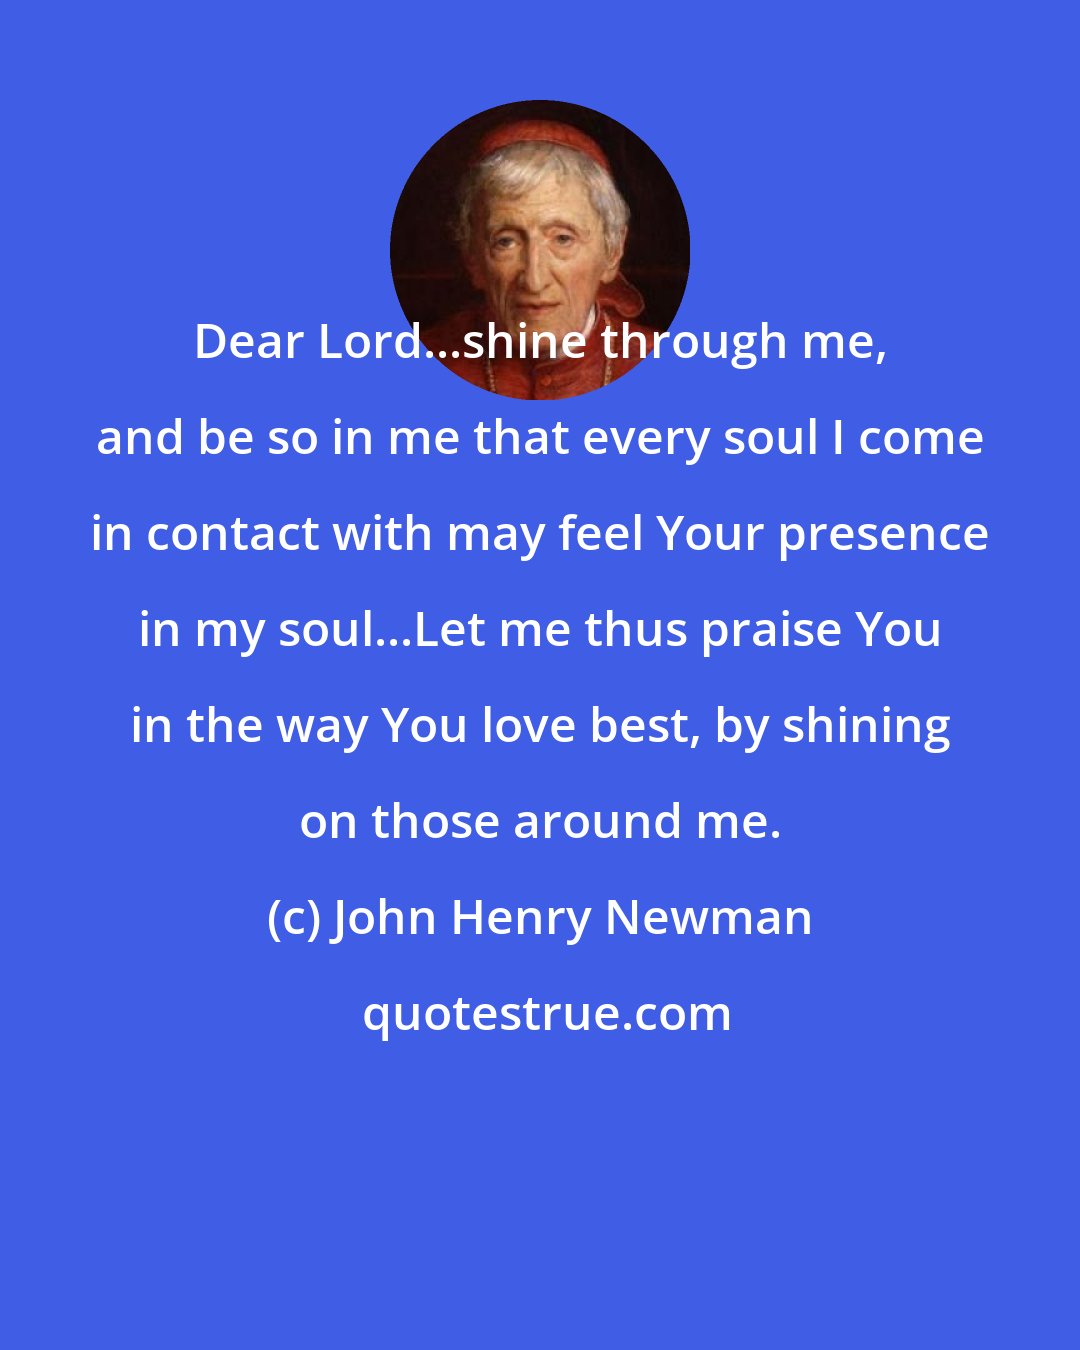 John Henry Newman: Dear Lord...shine through me, and be so in me that every soul I come in contact with may feel Your presence in my soul...Let me thus praise You in the way You love best, by shining on those around me.